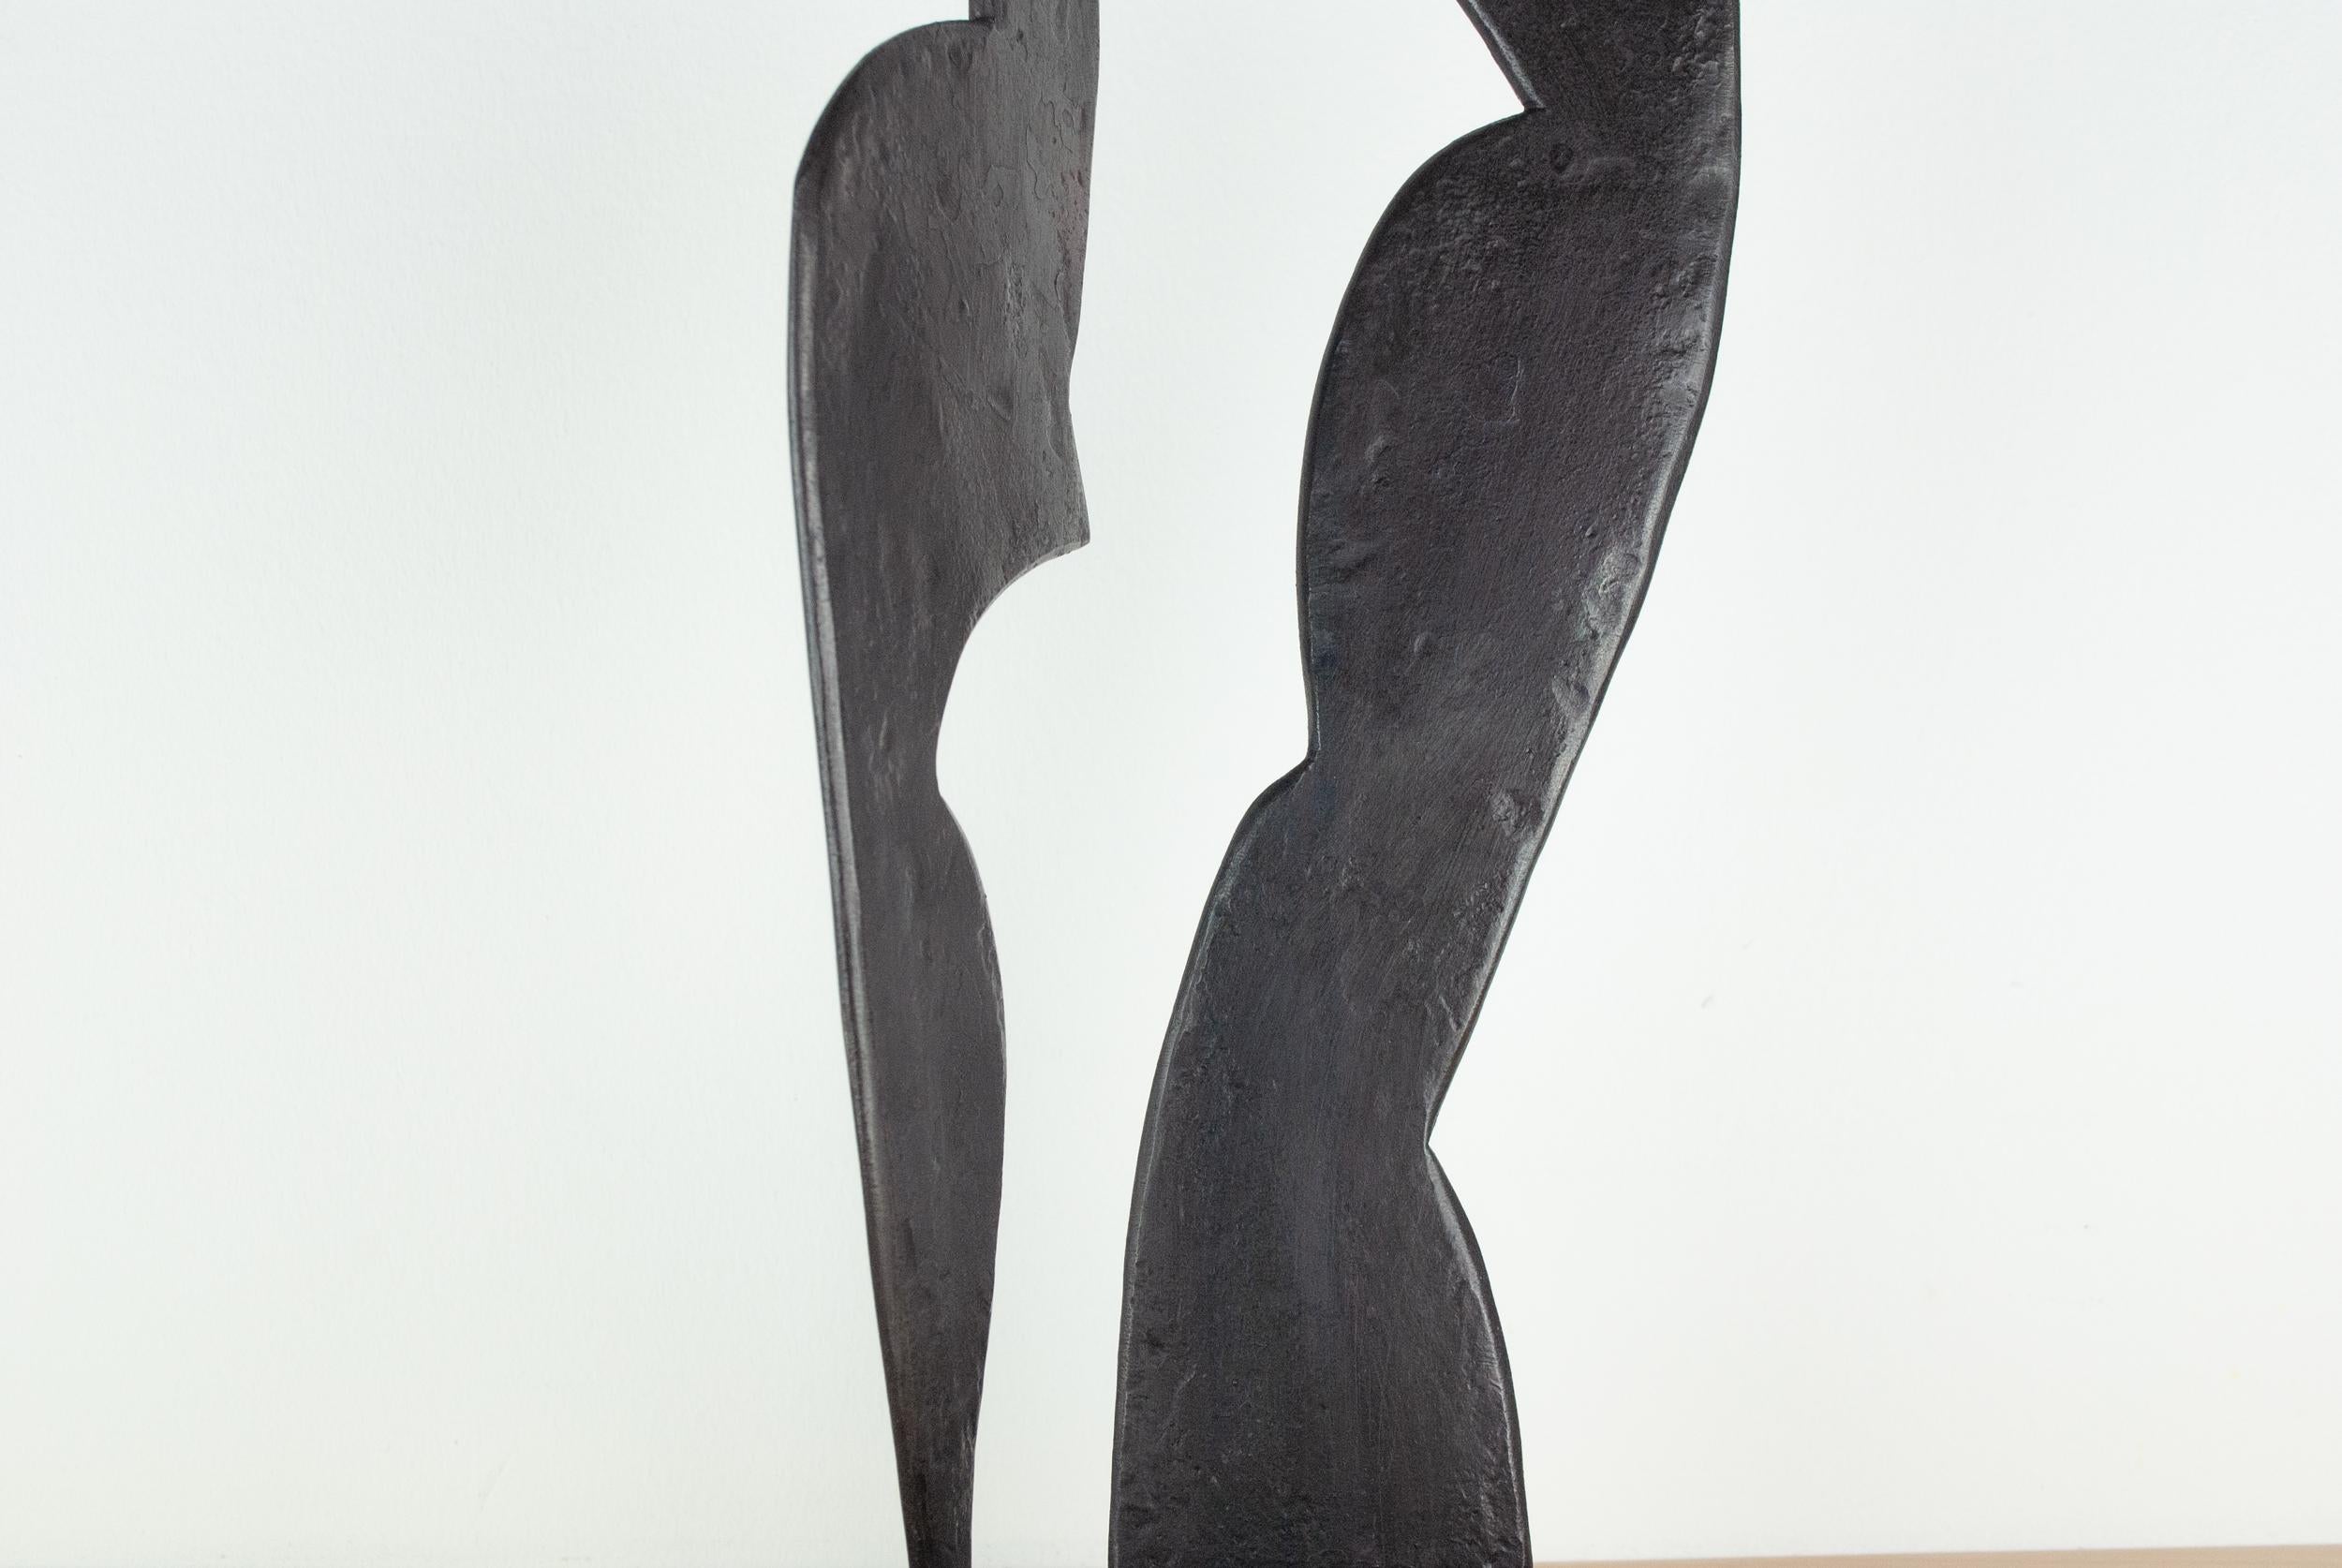 British Contemporary Black Forged Steel Sculpture Inspired by H. Bertoia - Two Forms 02 For Sale